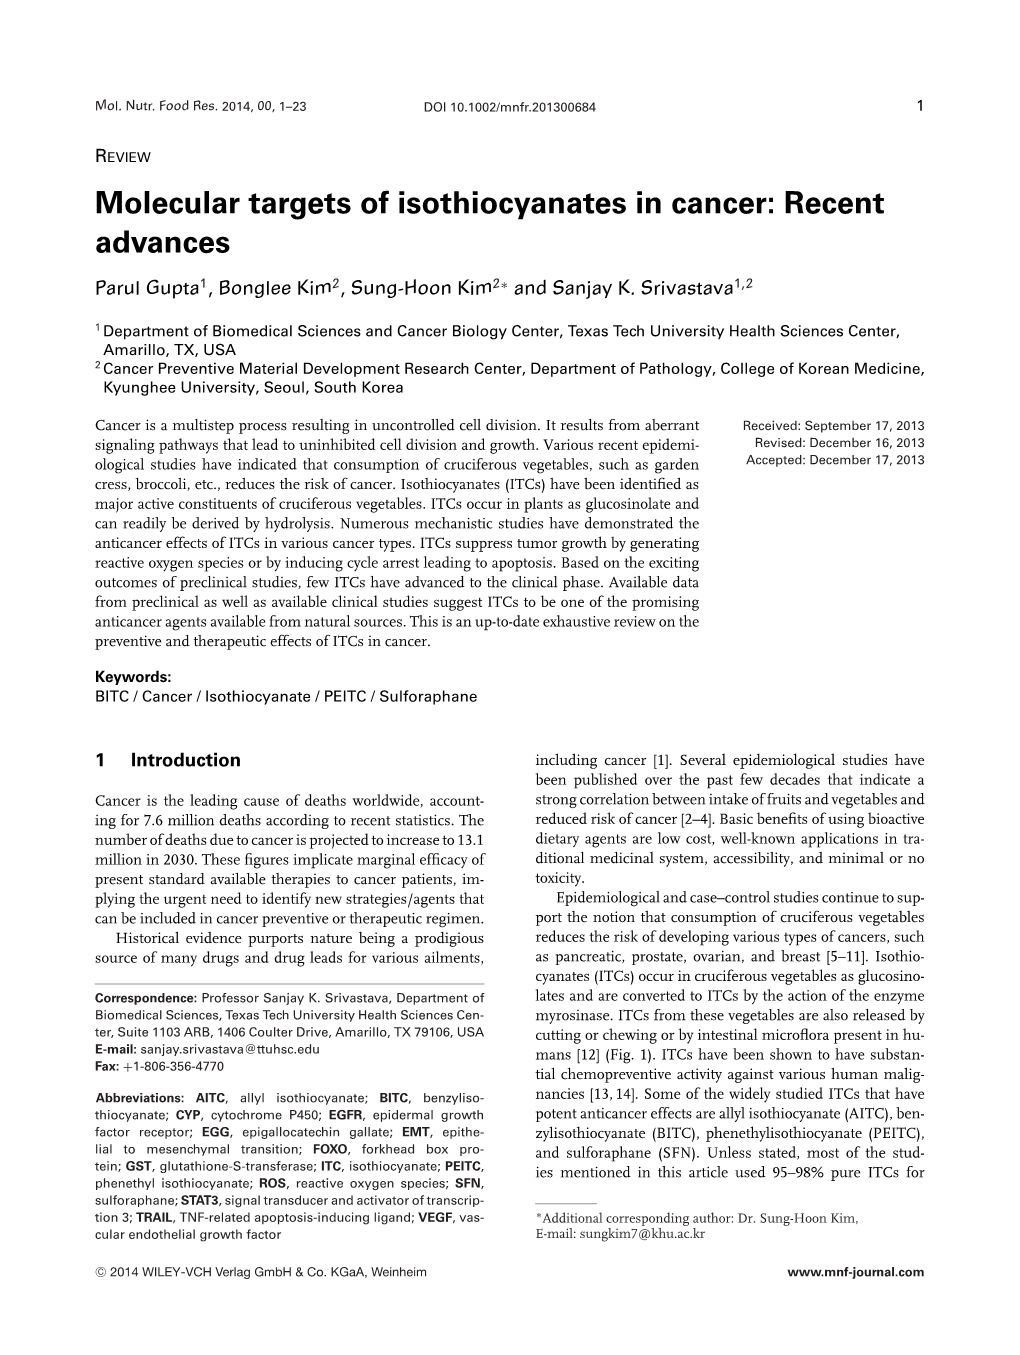 Molecular Targets of Isothiocyanates in Cancer: Recent Advances